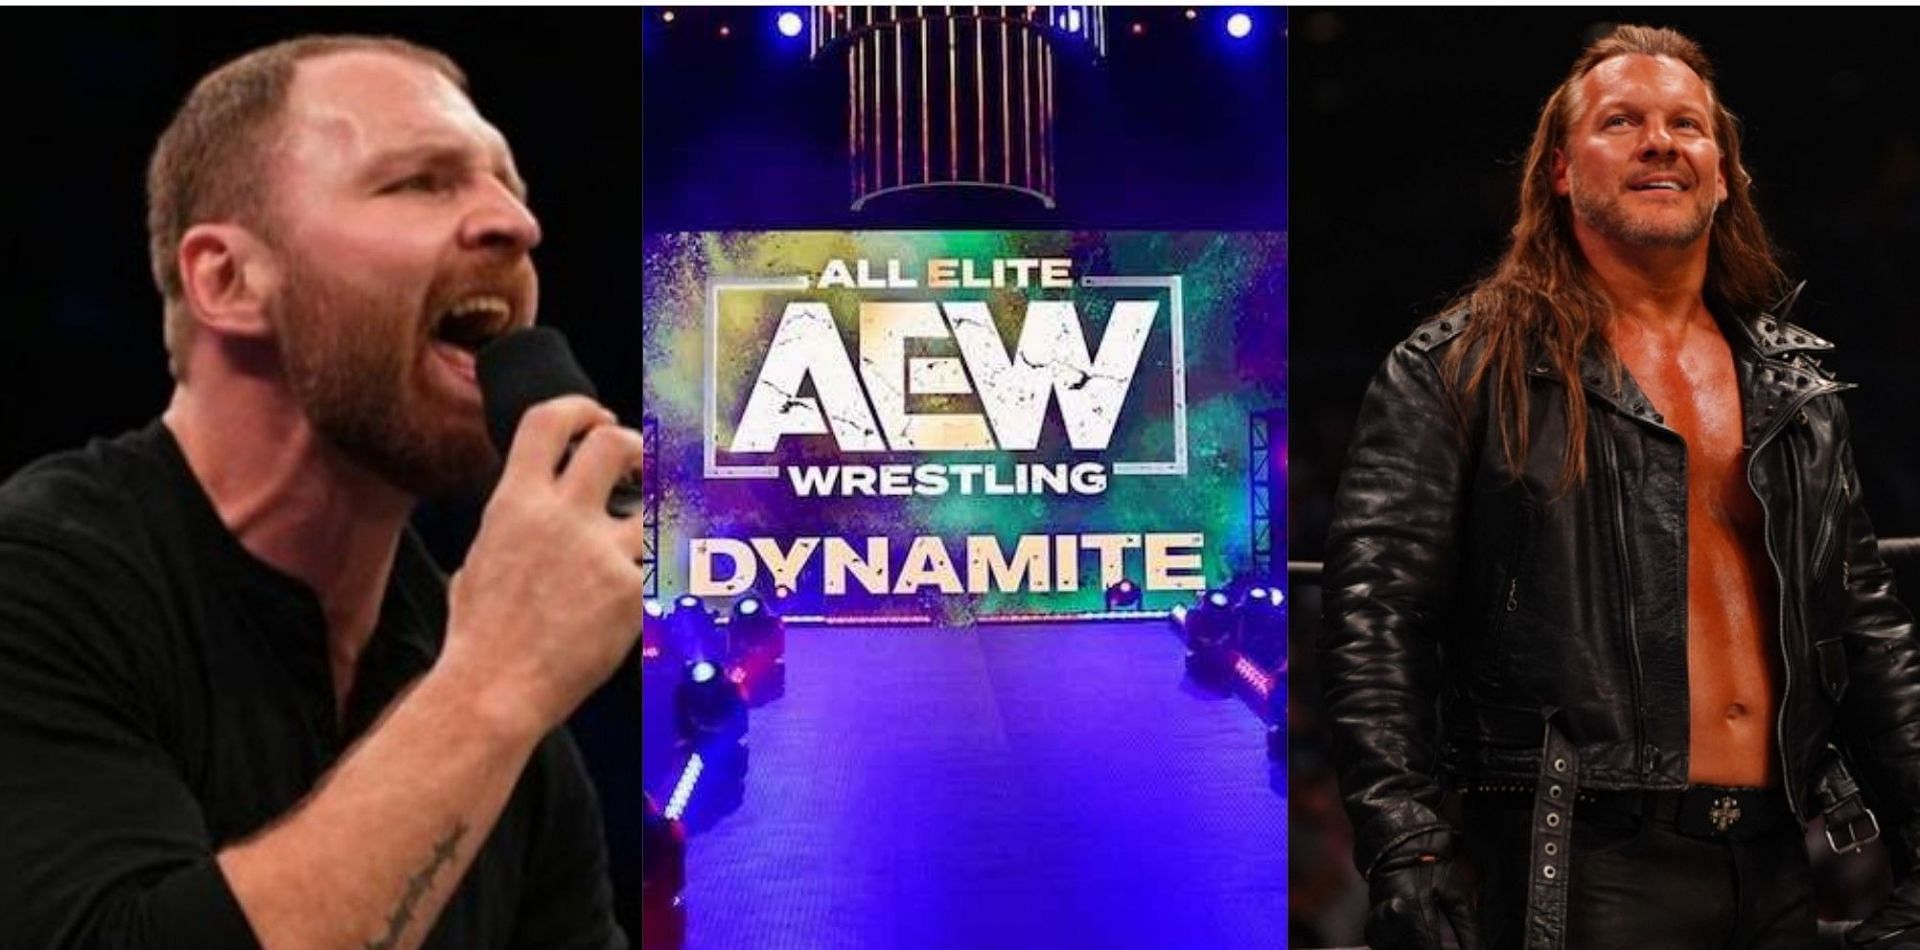 What can fans expect from Dynamite this week?